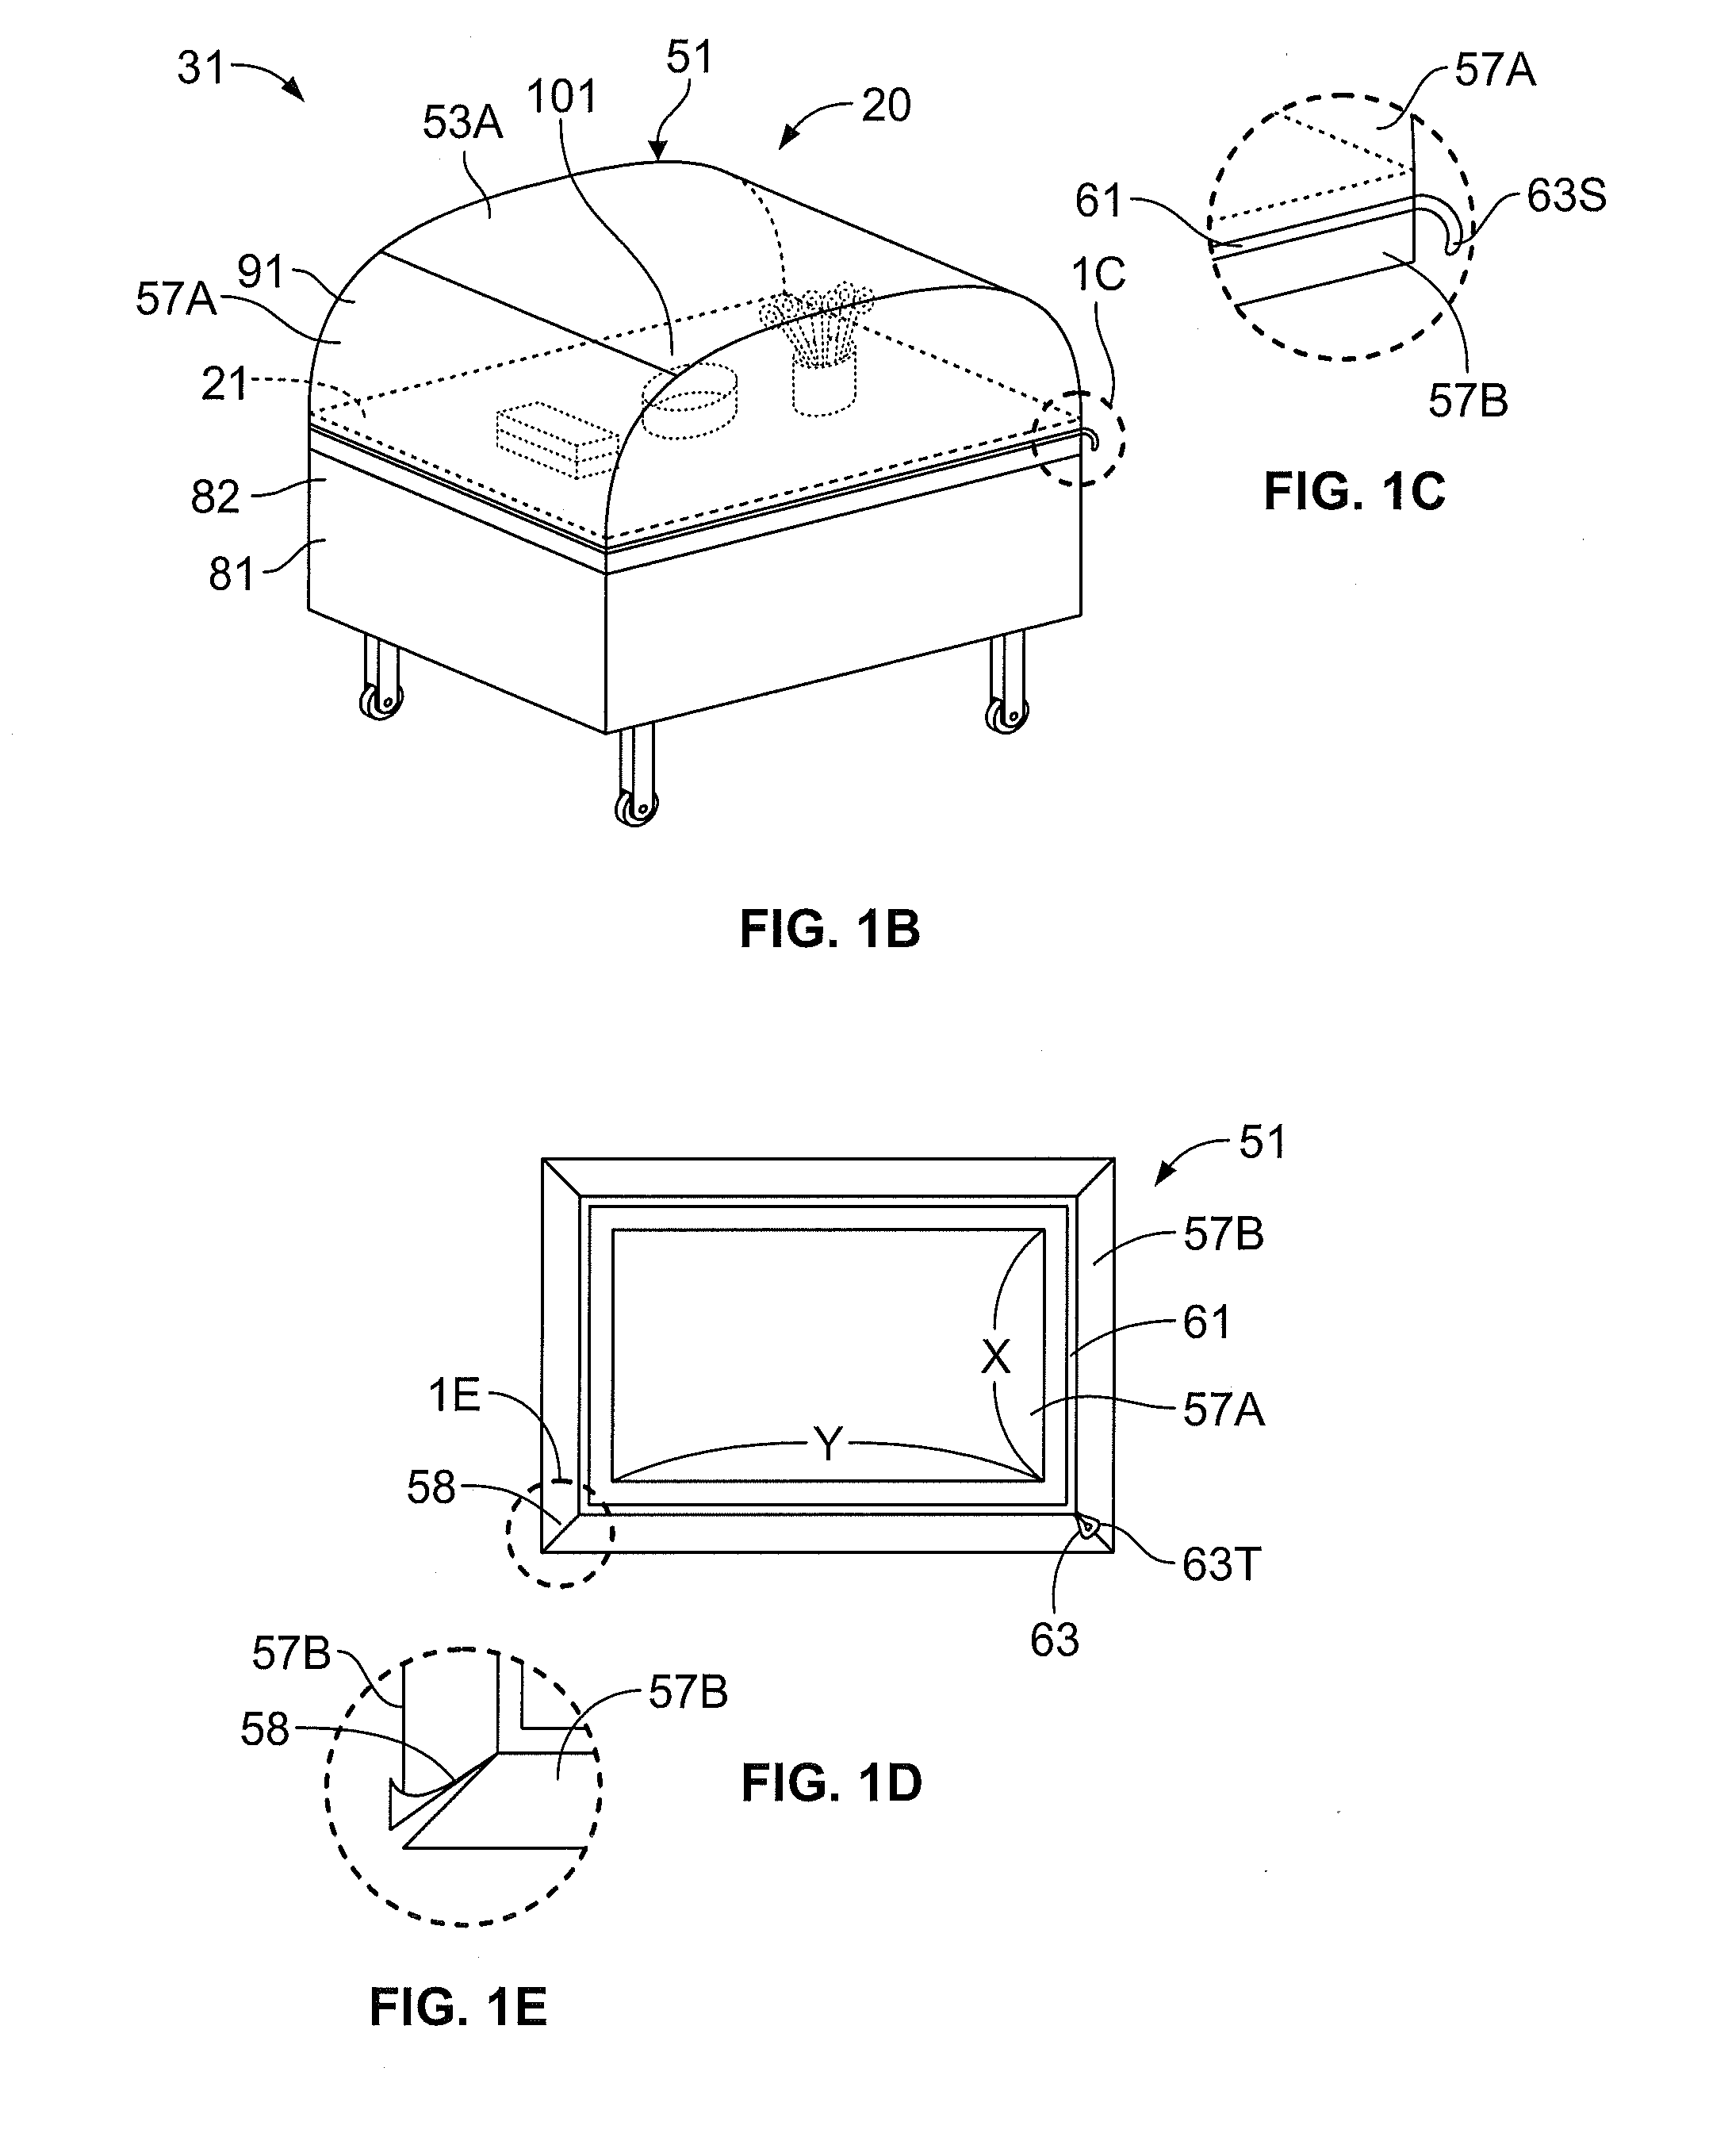 System and methods for providing protective coverage of an operational surface